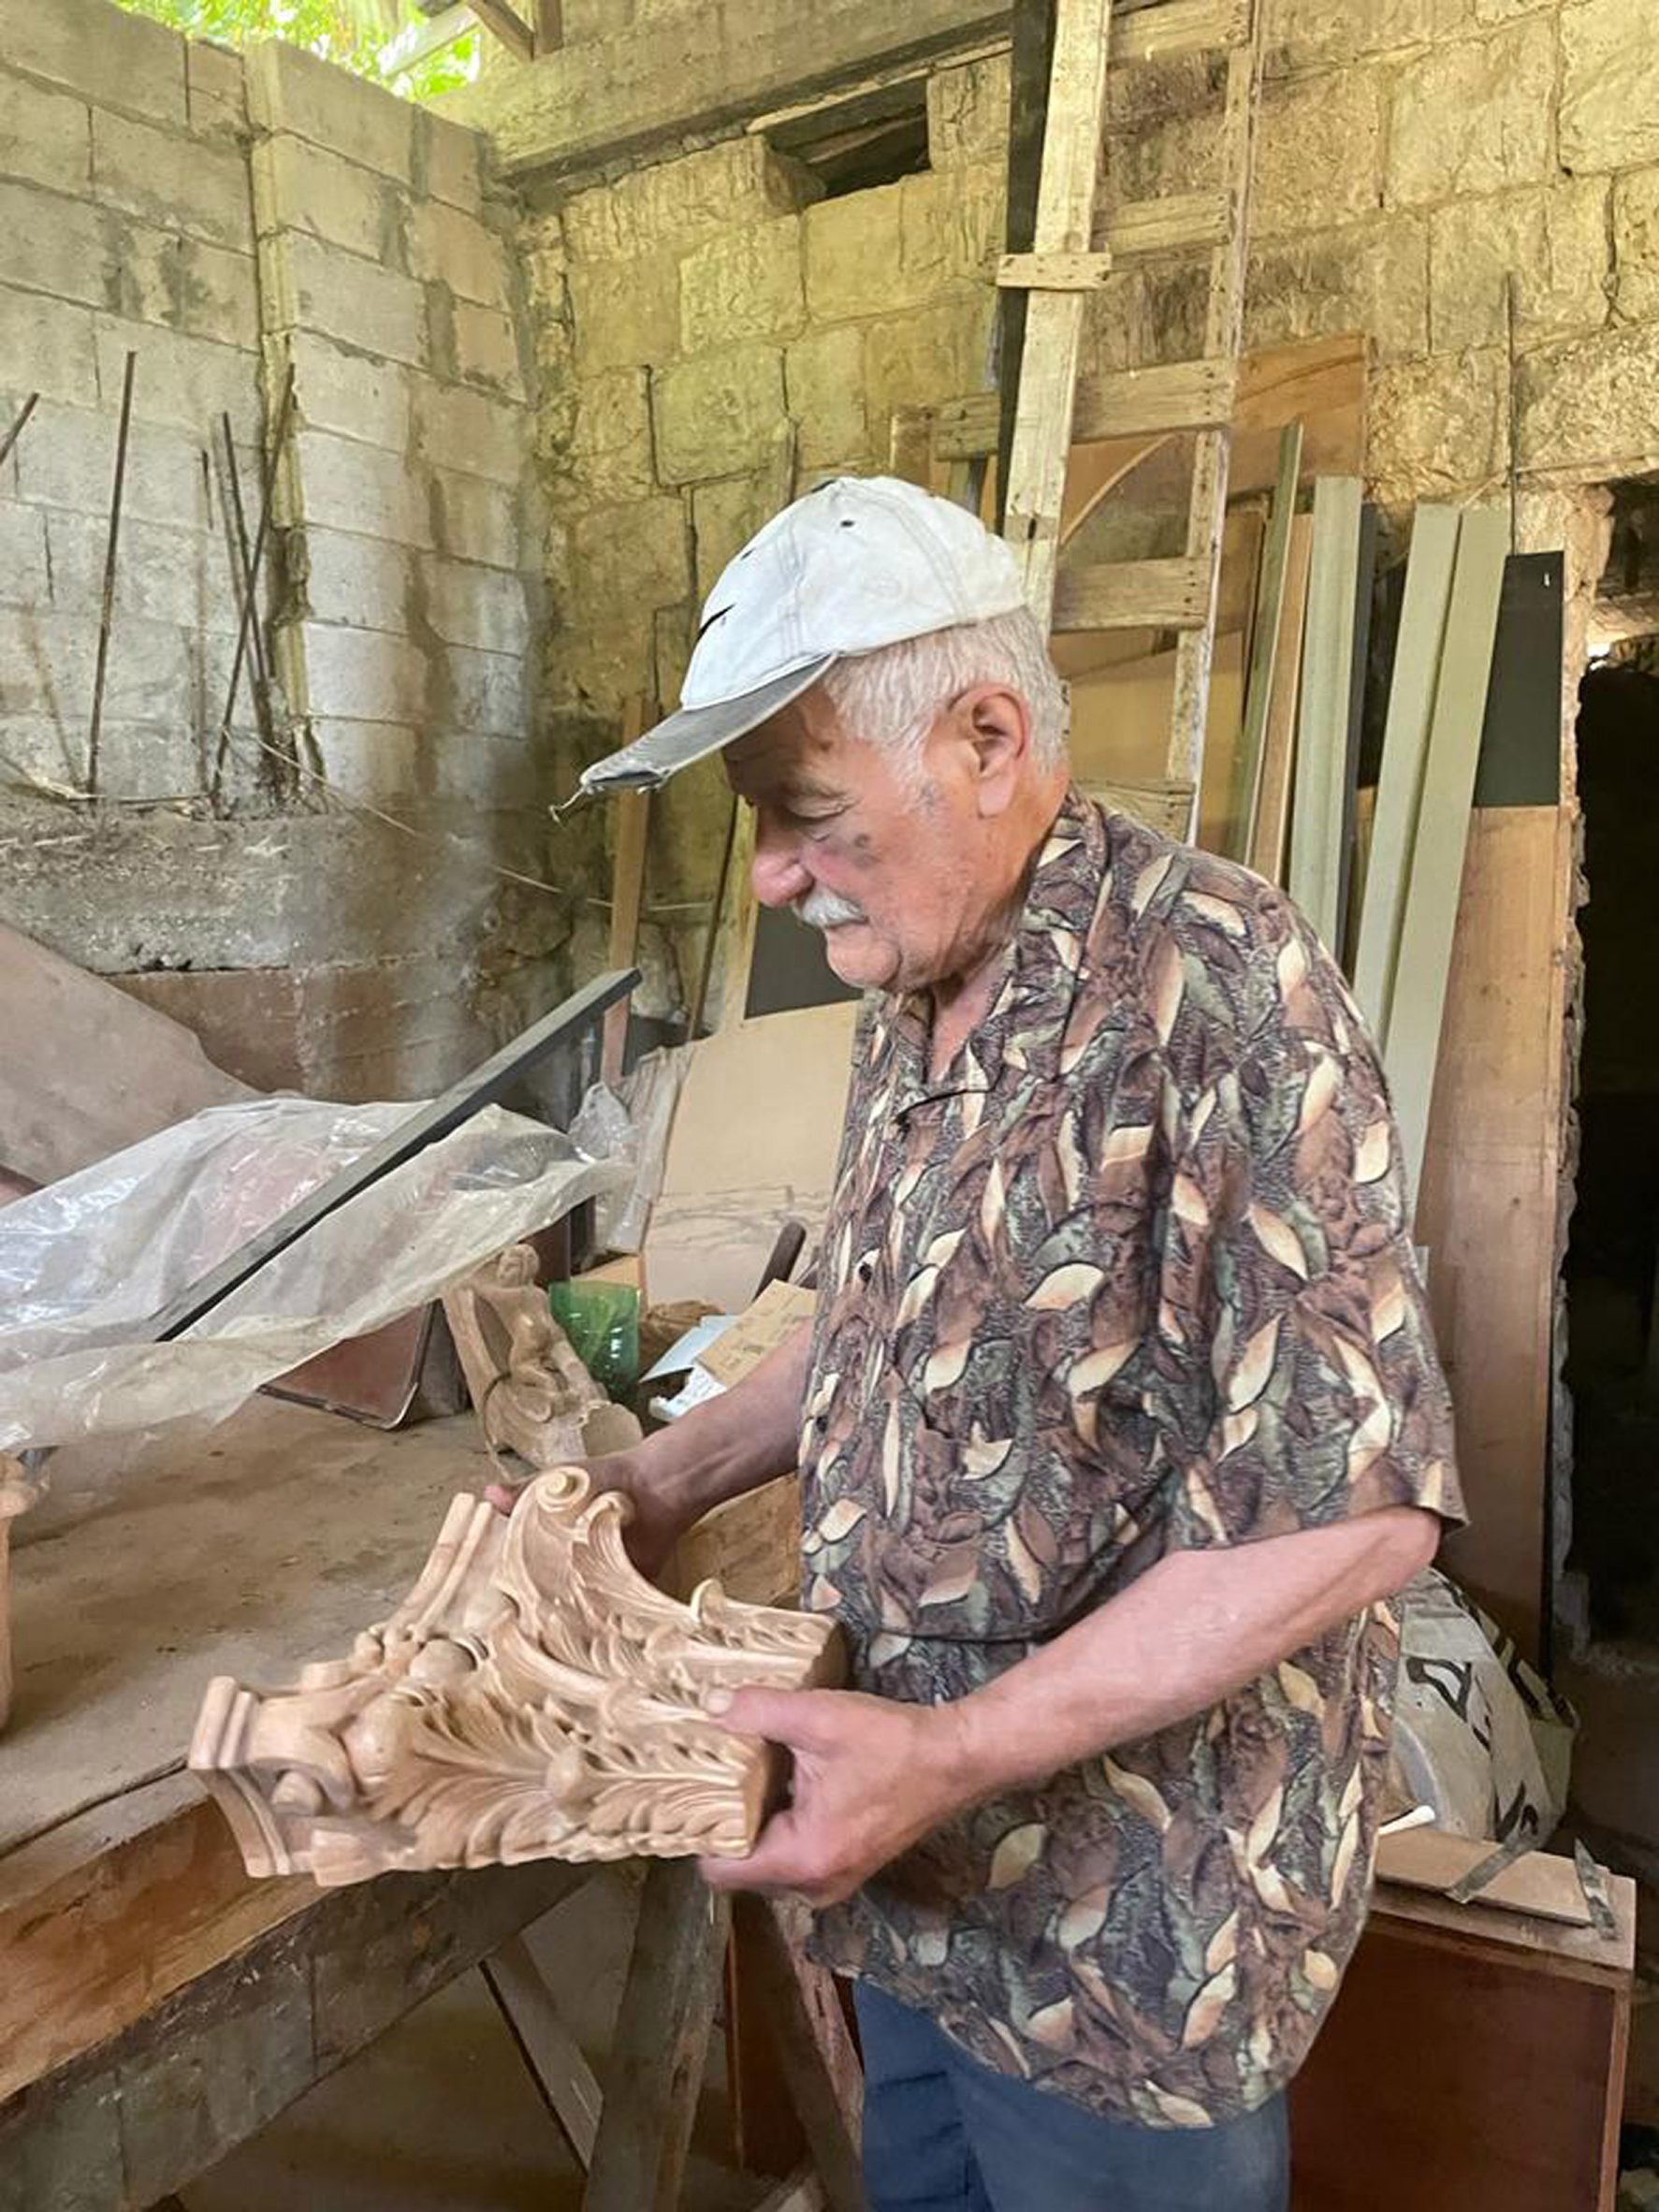 Photo of artisan Elie Ayrouth sculpting an ornate capital for the top of a column